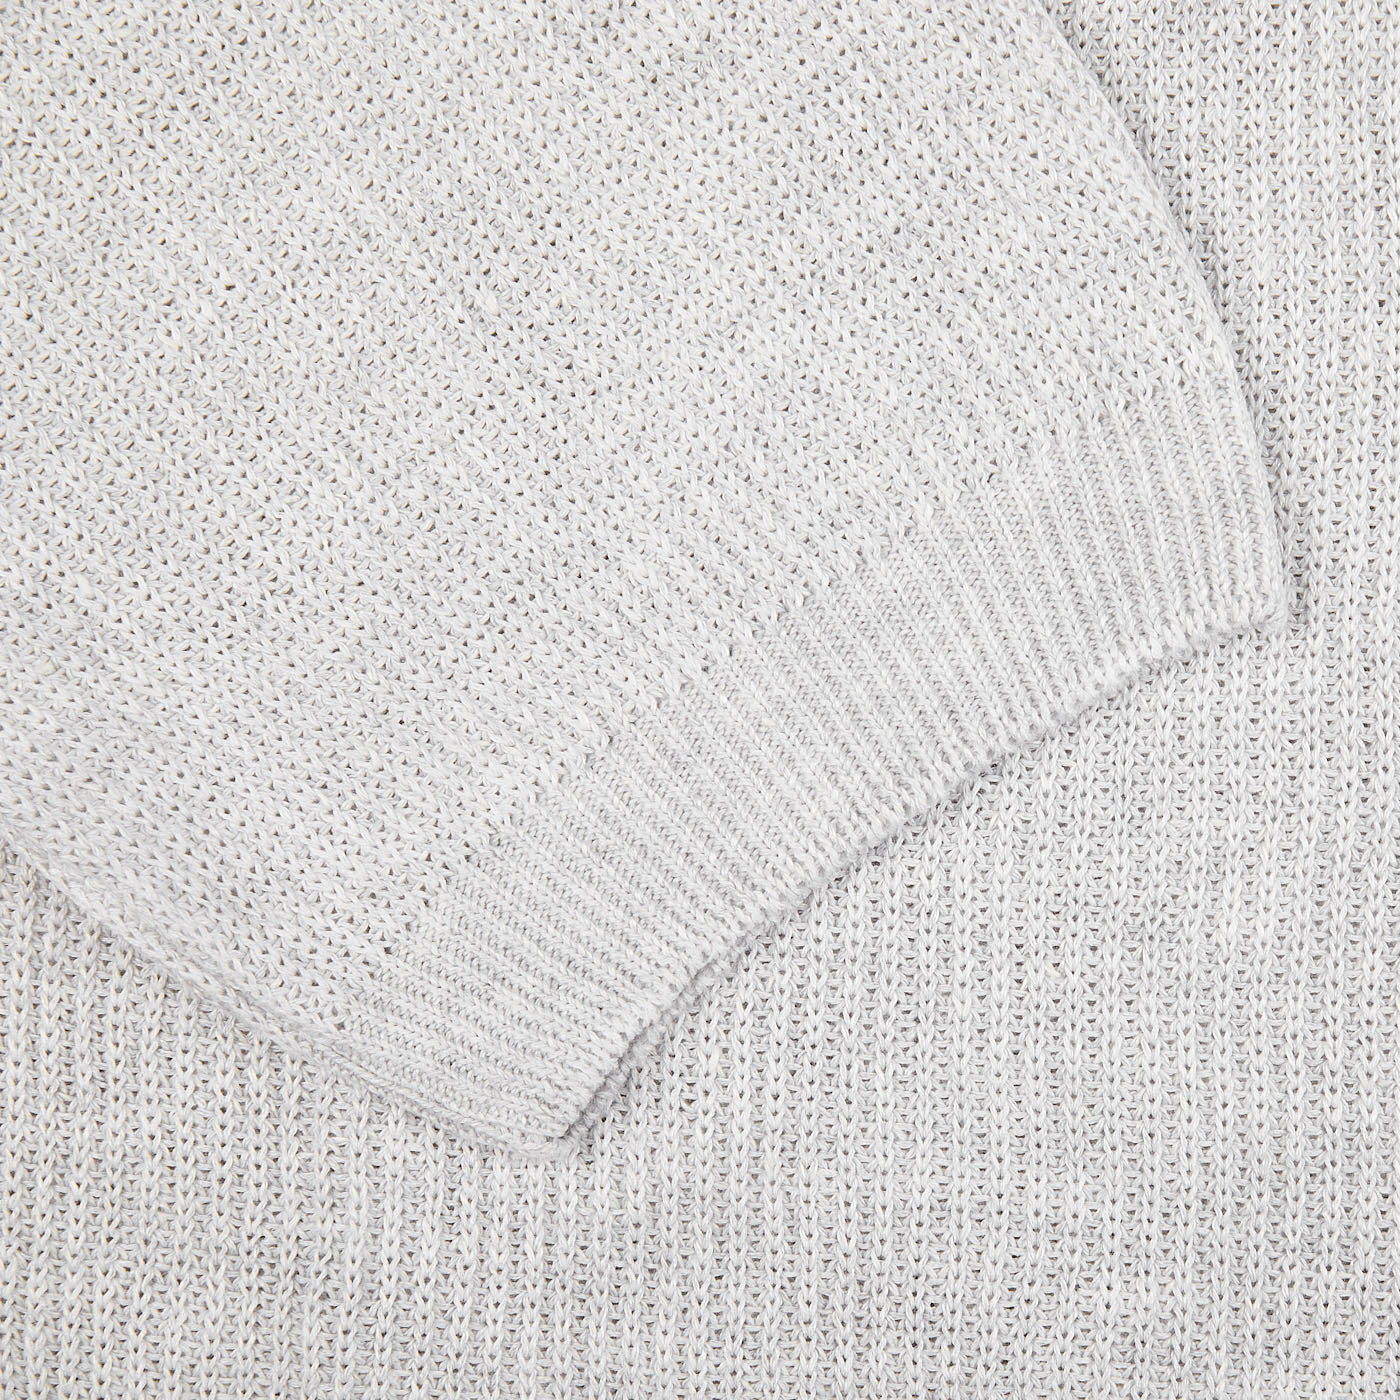 A close up image of a Light Grey Linen Cotton T-shirt made from cotton-linen thread by Gran Sasso.